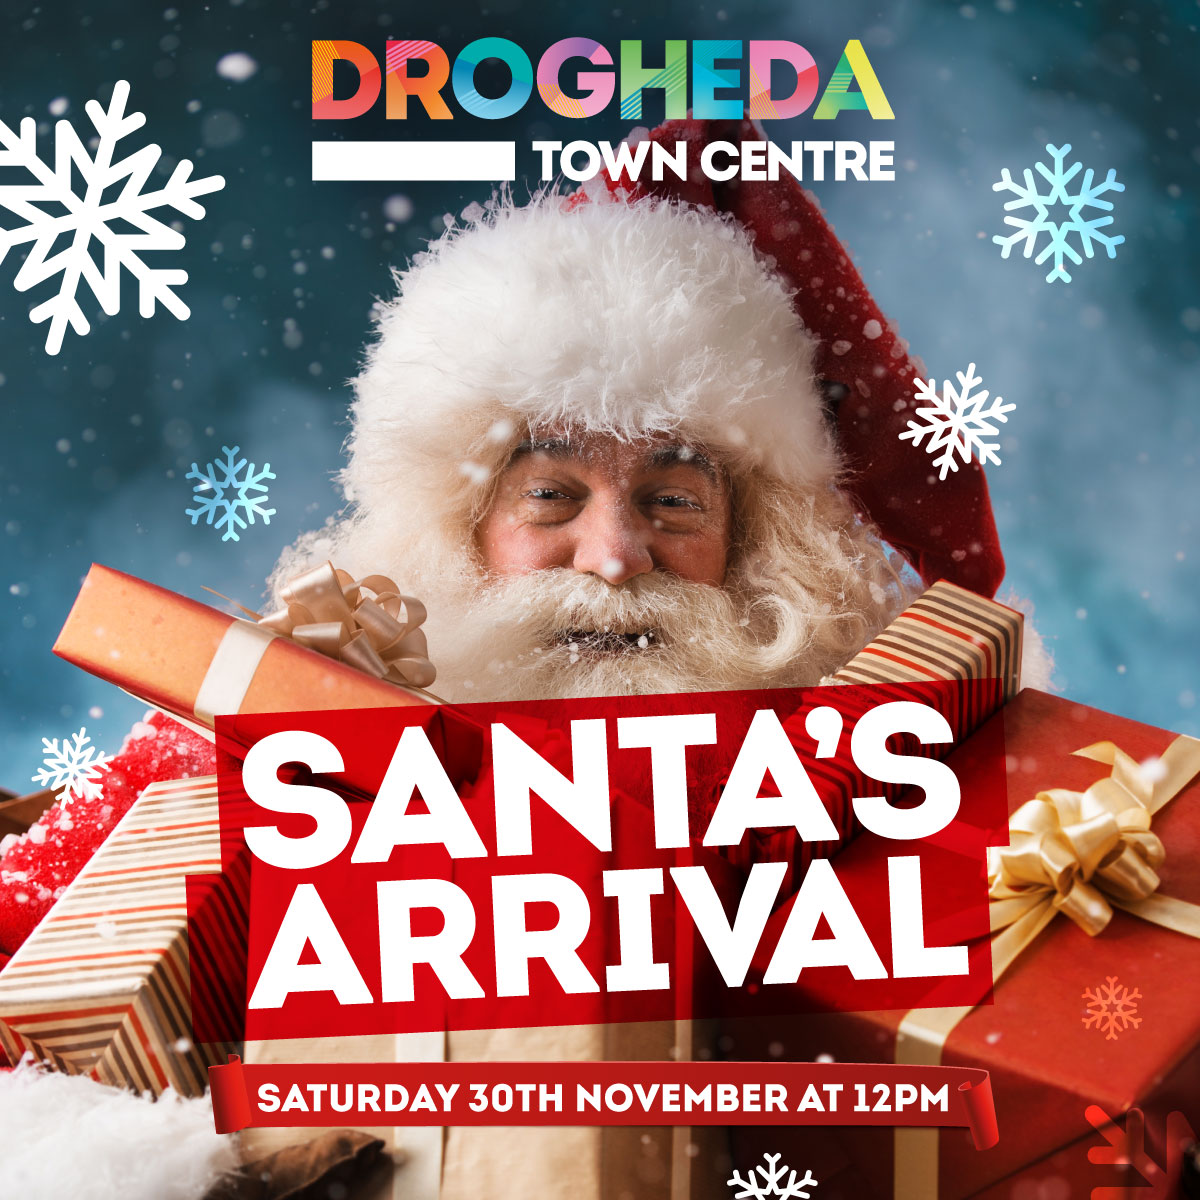 SANTA IS COMING TO DROGHEDA TOWN CENTRE